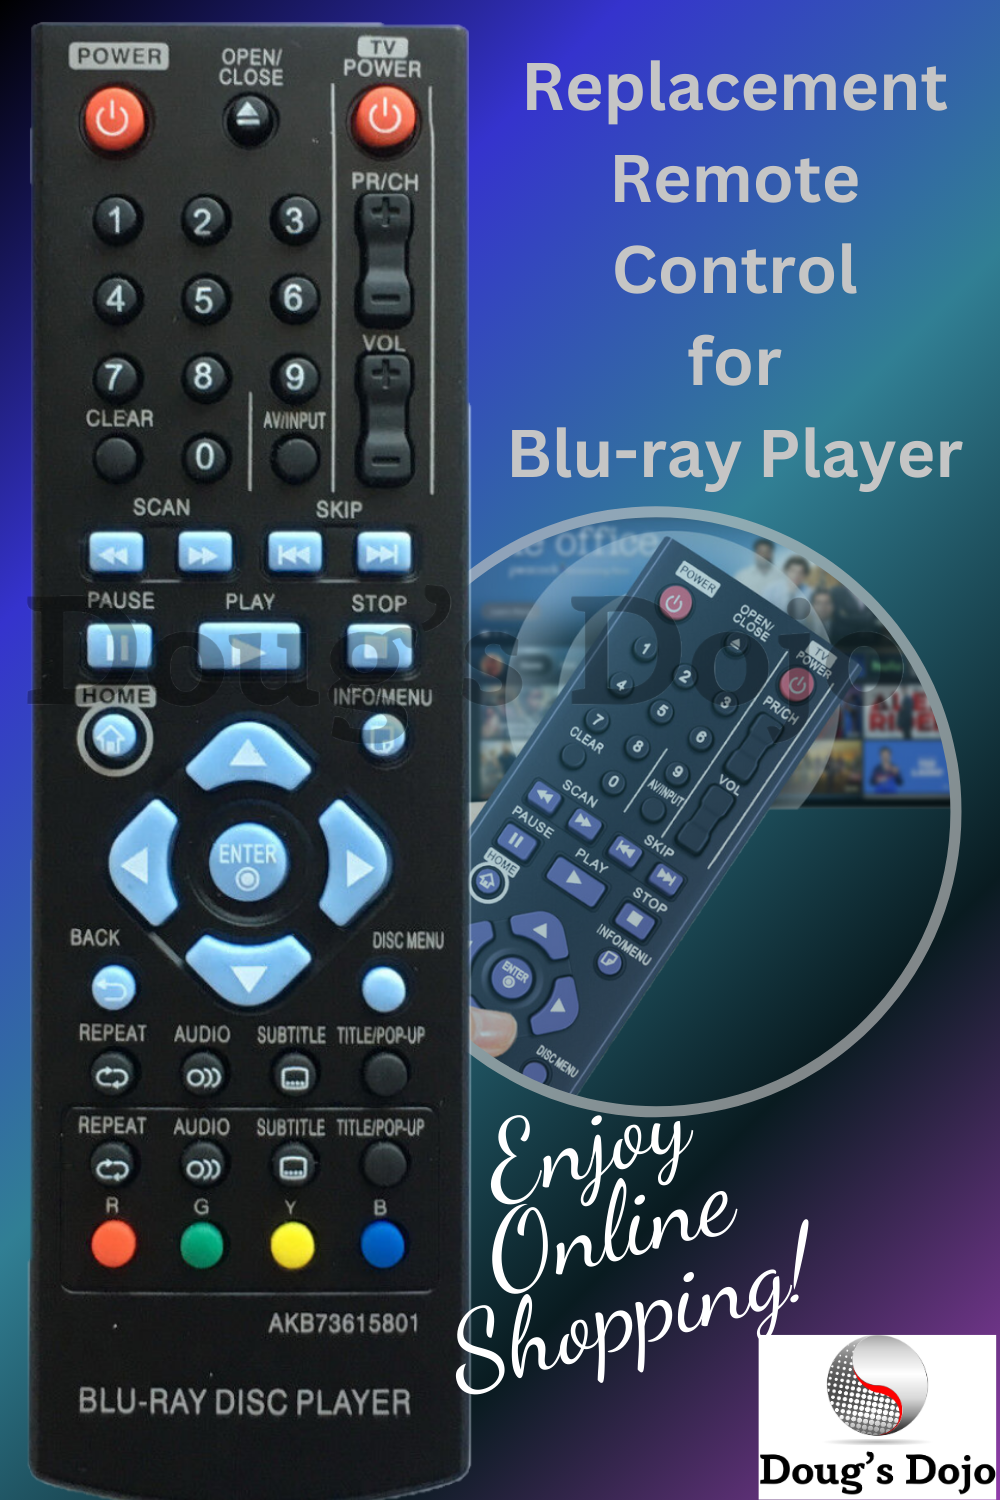 NEW LG Replacement Remote AKB73615801 For LG DVD Blu-ray Player BP200 BP220